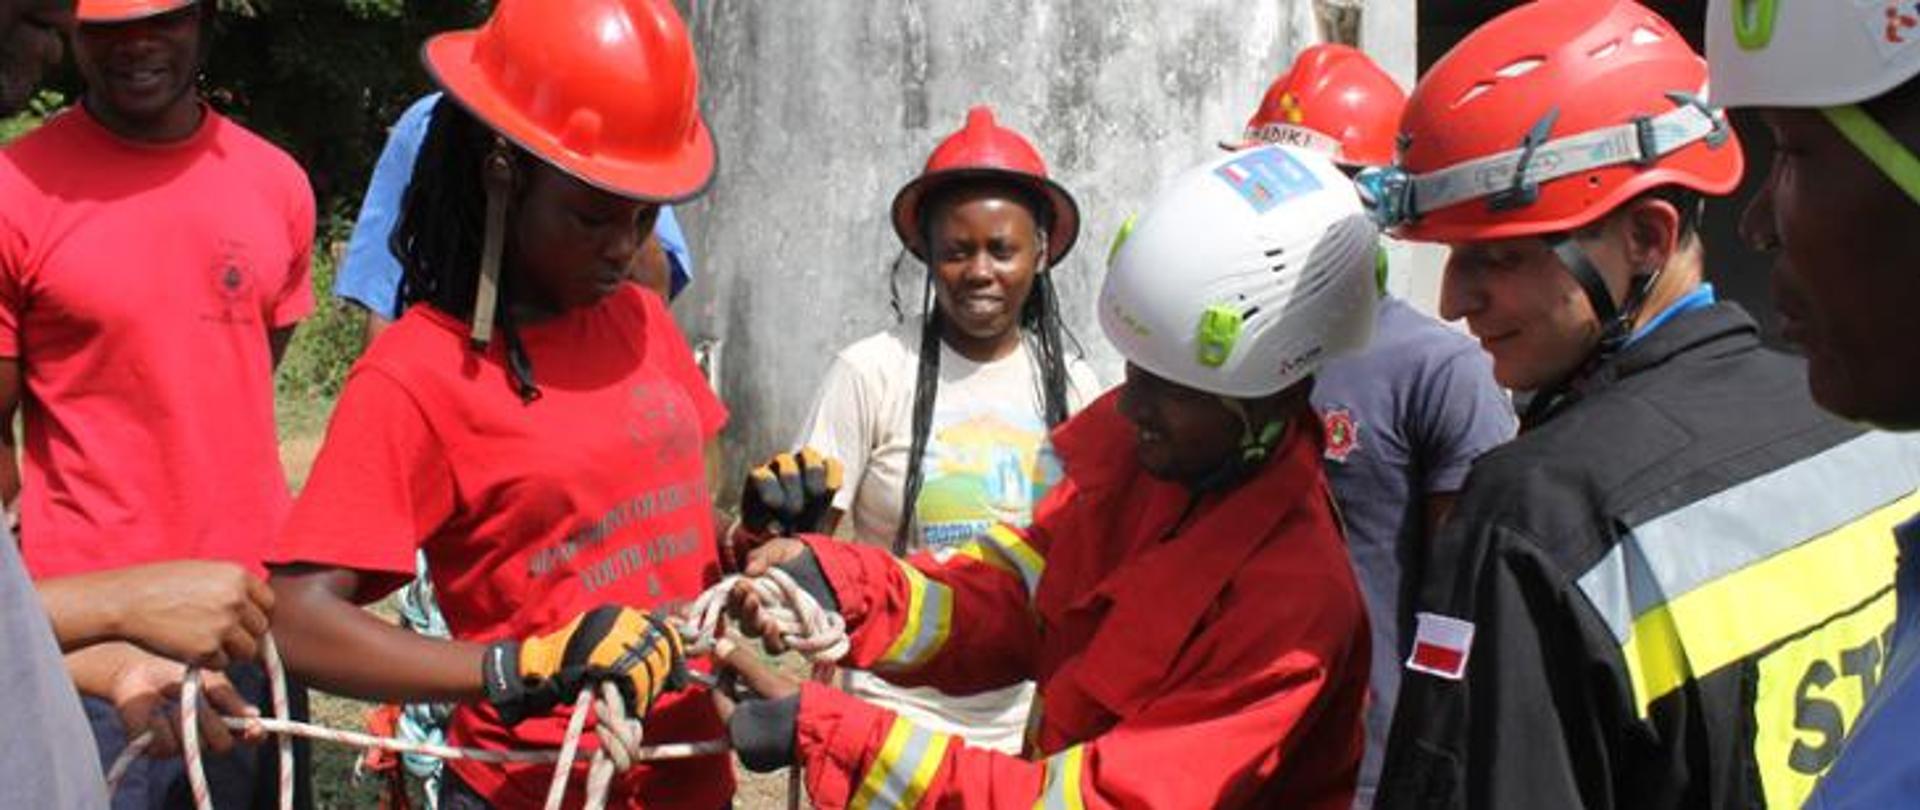 Provision of training and equipment for Fire Brigade units in Kenya